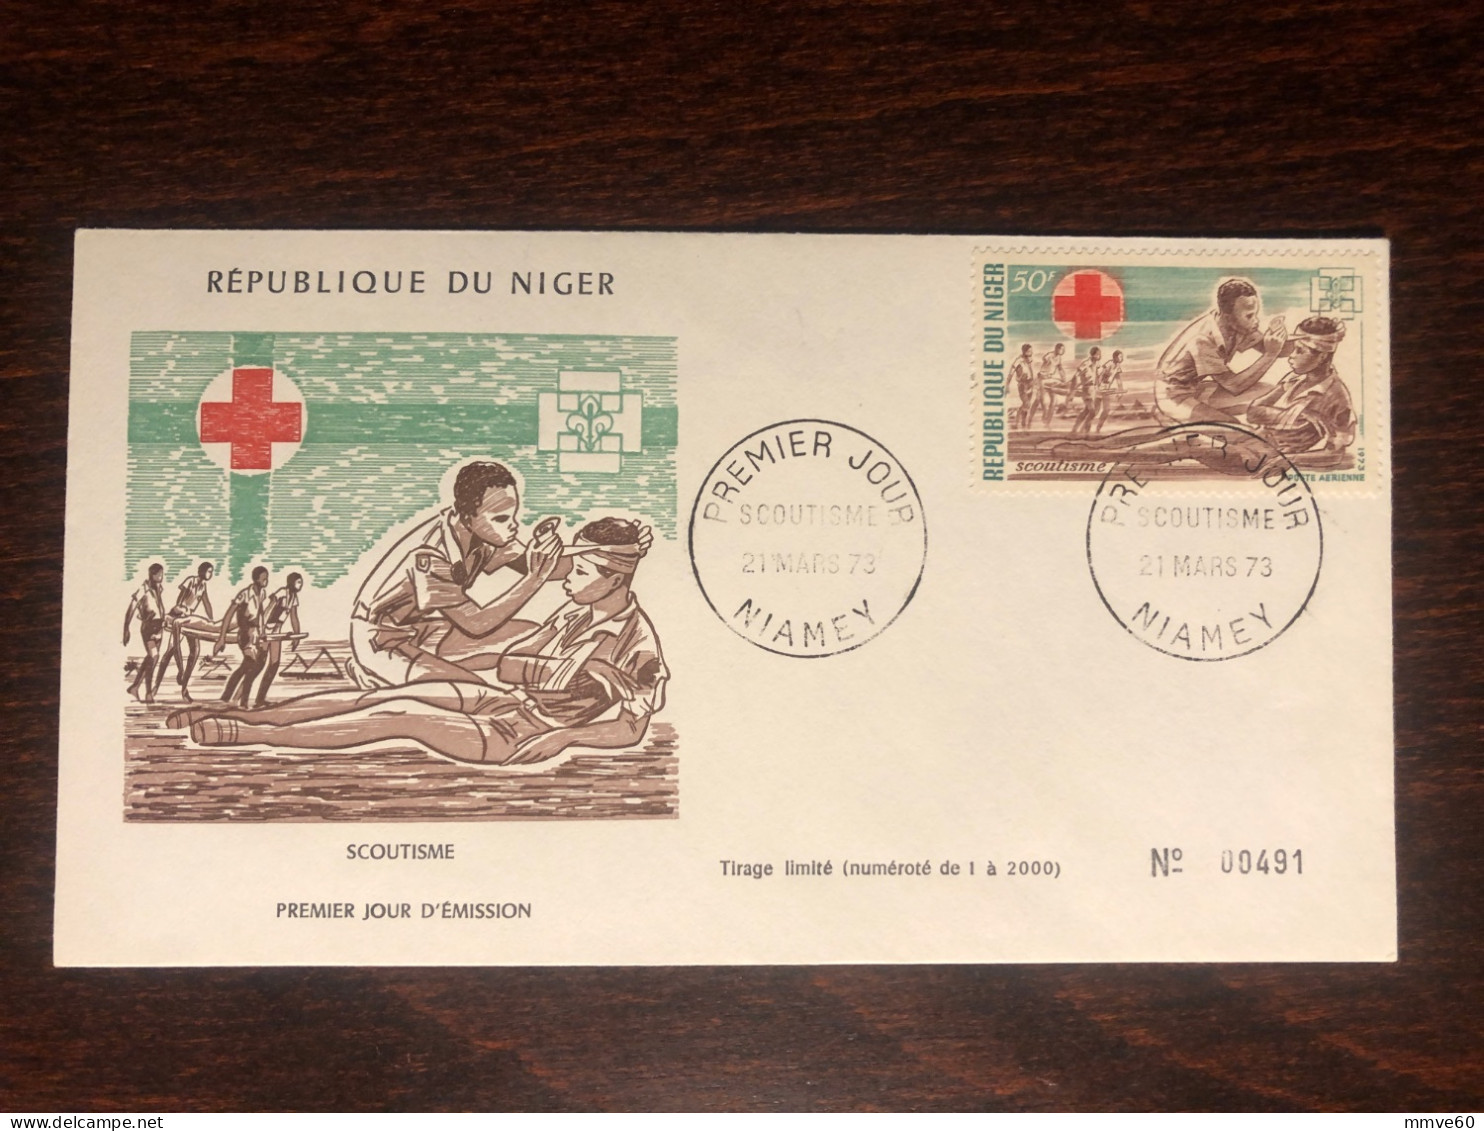 NIGER FDC COVER 1973 YEAR RED CROSS HEALTH MEDICINE STAMPS - Níger (1960-...)